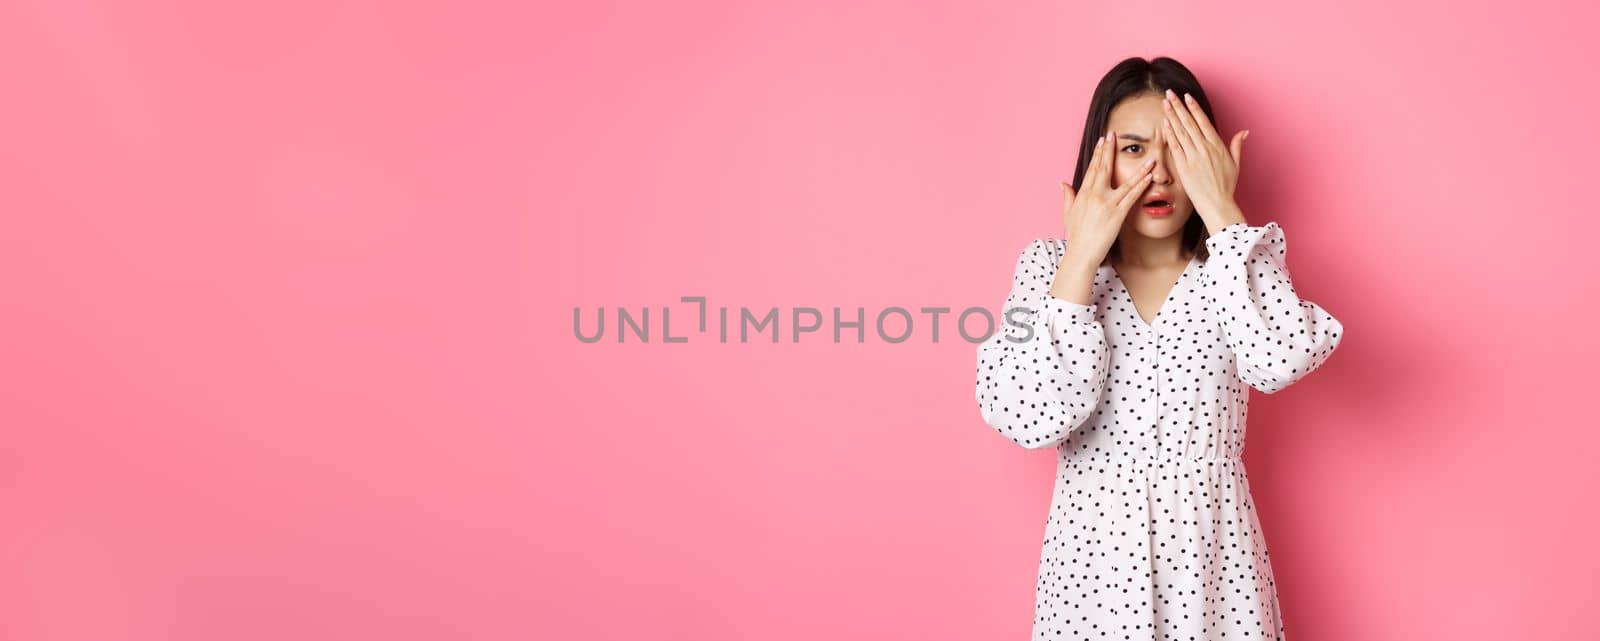 Disappointed asian woman peeking through fingers, open eyes and frowning displeased, staring with disdain at camera, standing over pink background.